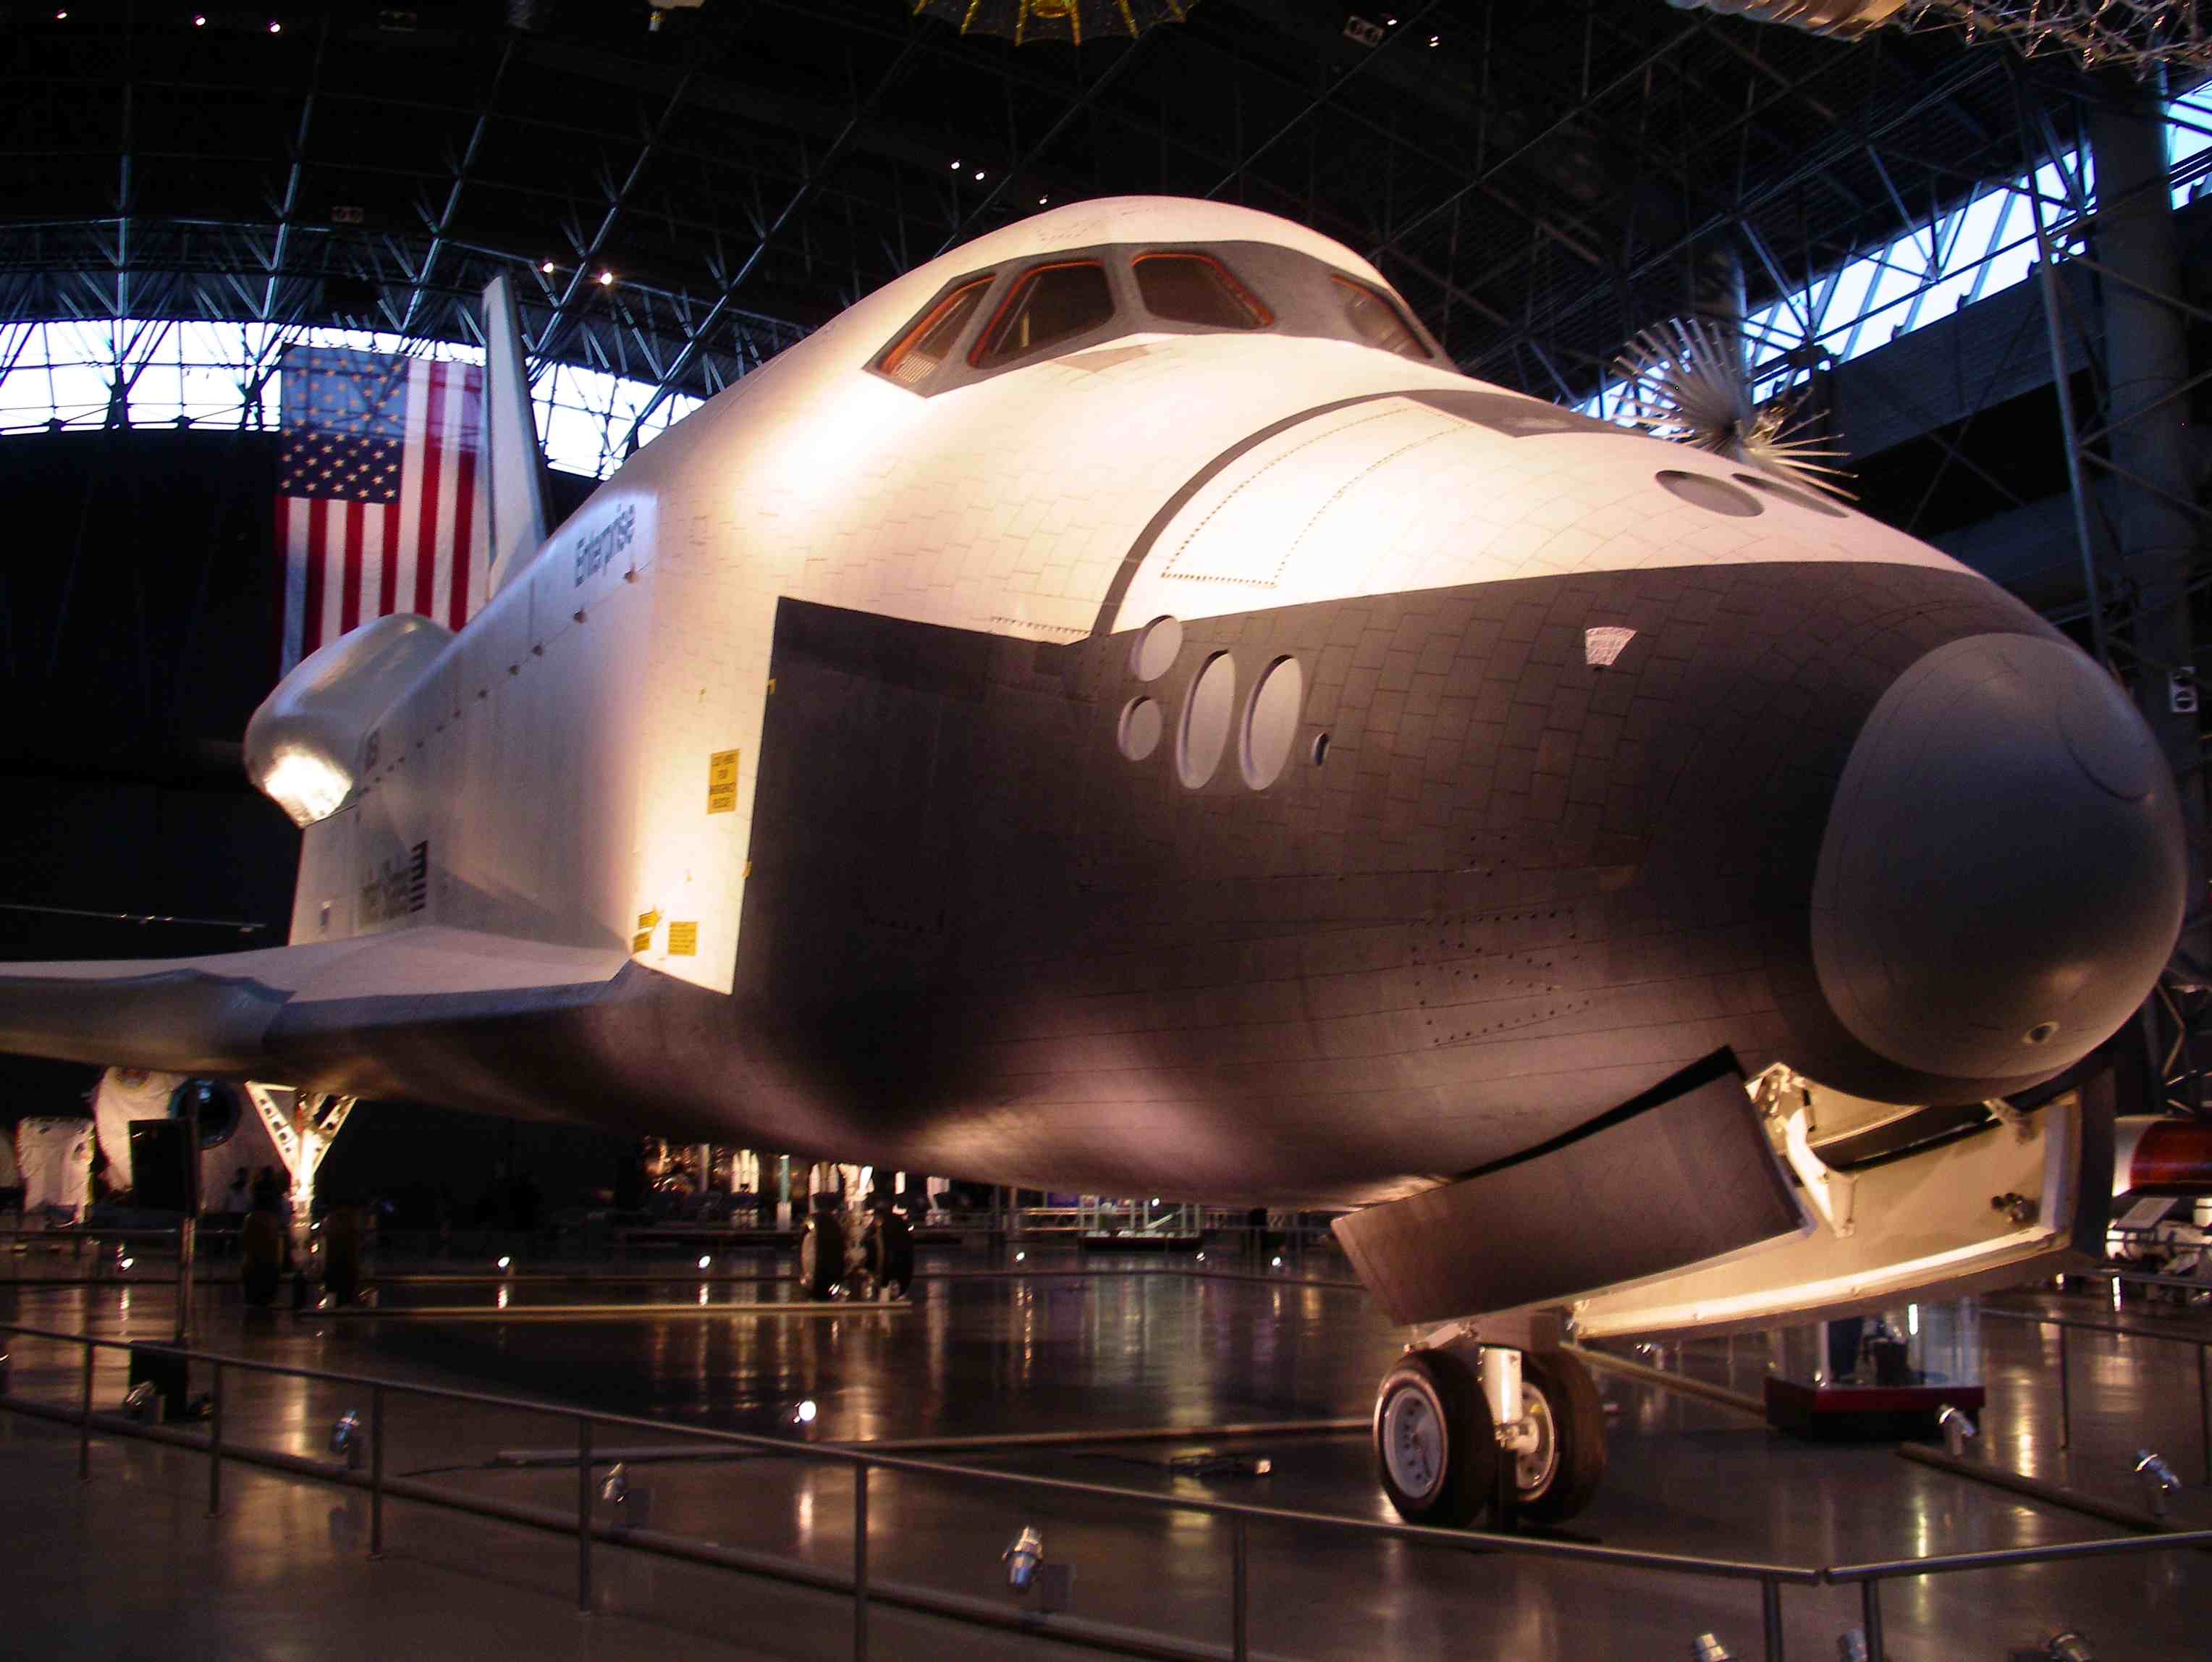 The space shuttle was NASA's space transportation system.